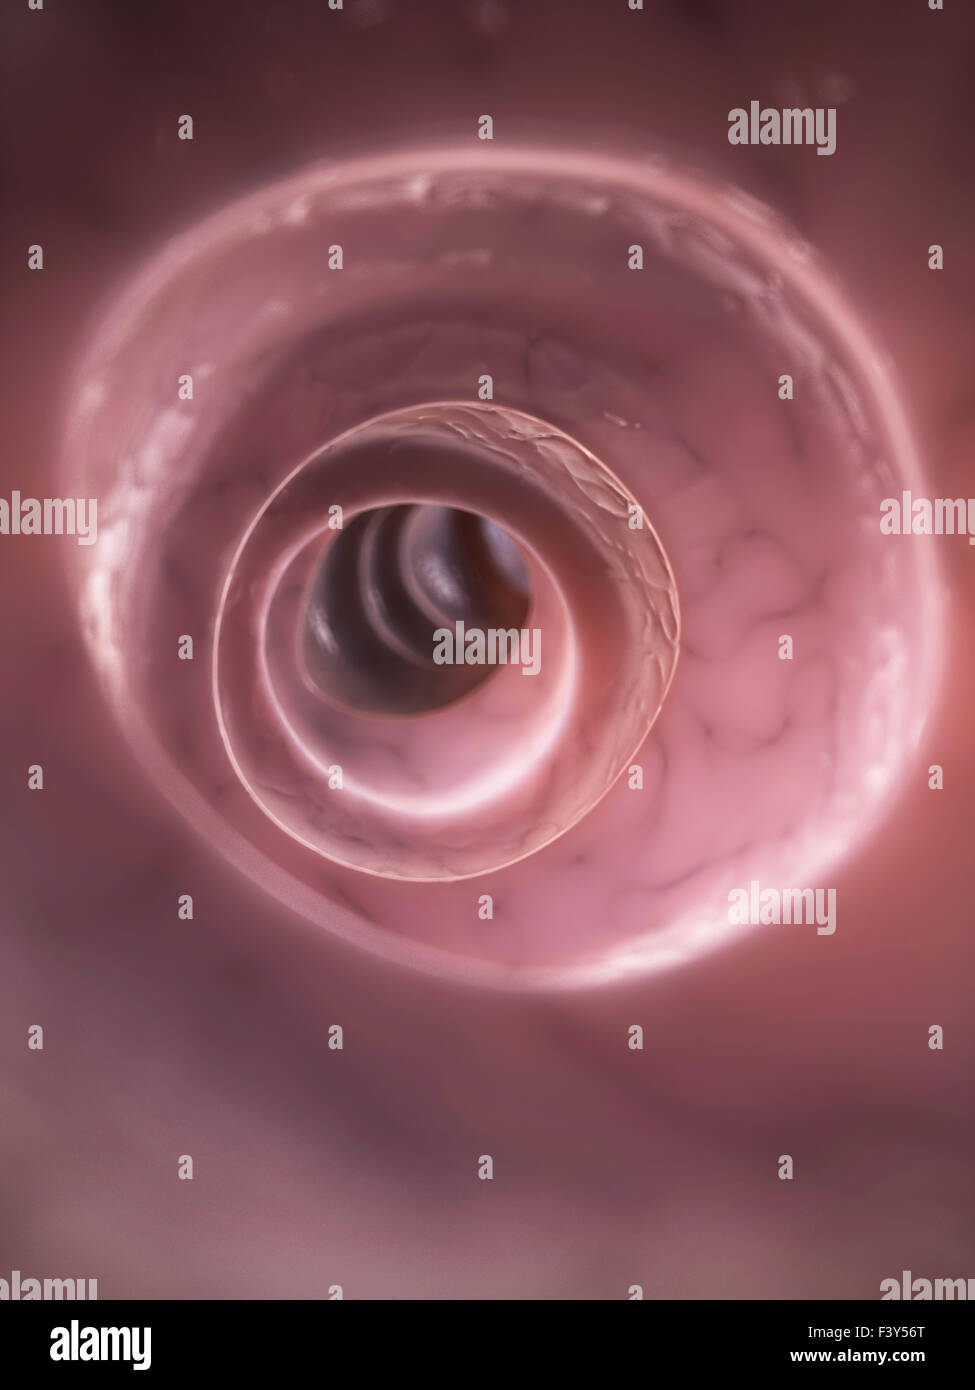 3d rendered illustration of the colon Stock Photo